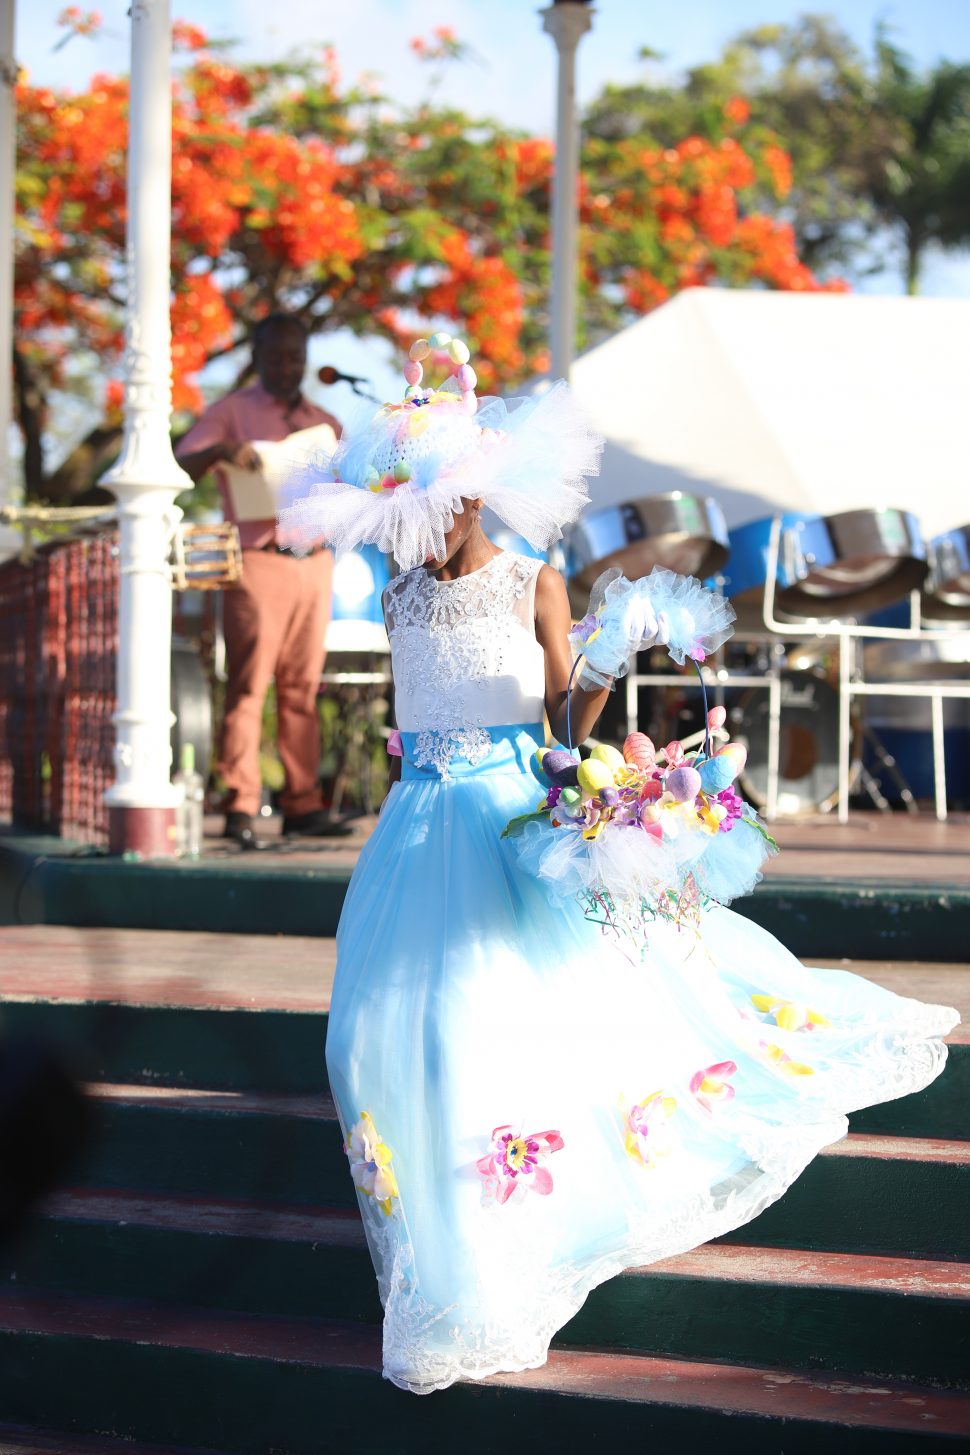 Making a wave:
Nine-year-old Janae Joseph gracing the stage with 
her ‘Ocean Waves’ hat 
during the Junior Elegant category of the Inner Wheel Club’s annual 
hat competition at the Promenade Gardens 
in Georgetown yesterday.  
(Terrence Thompson photo)
